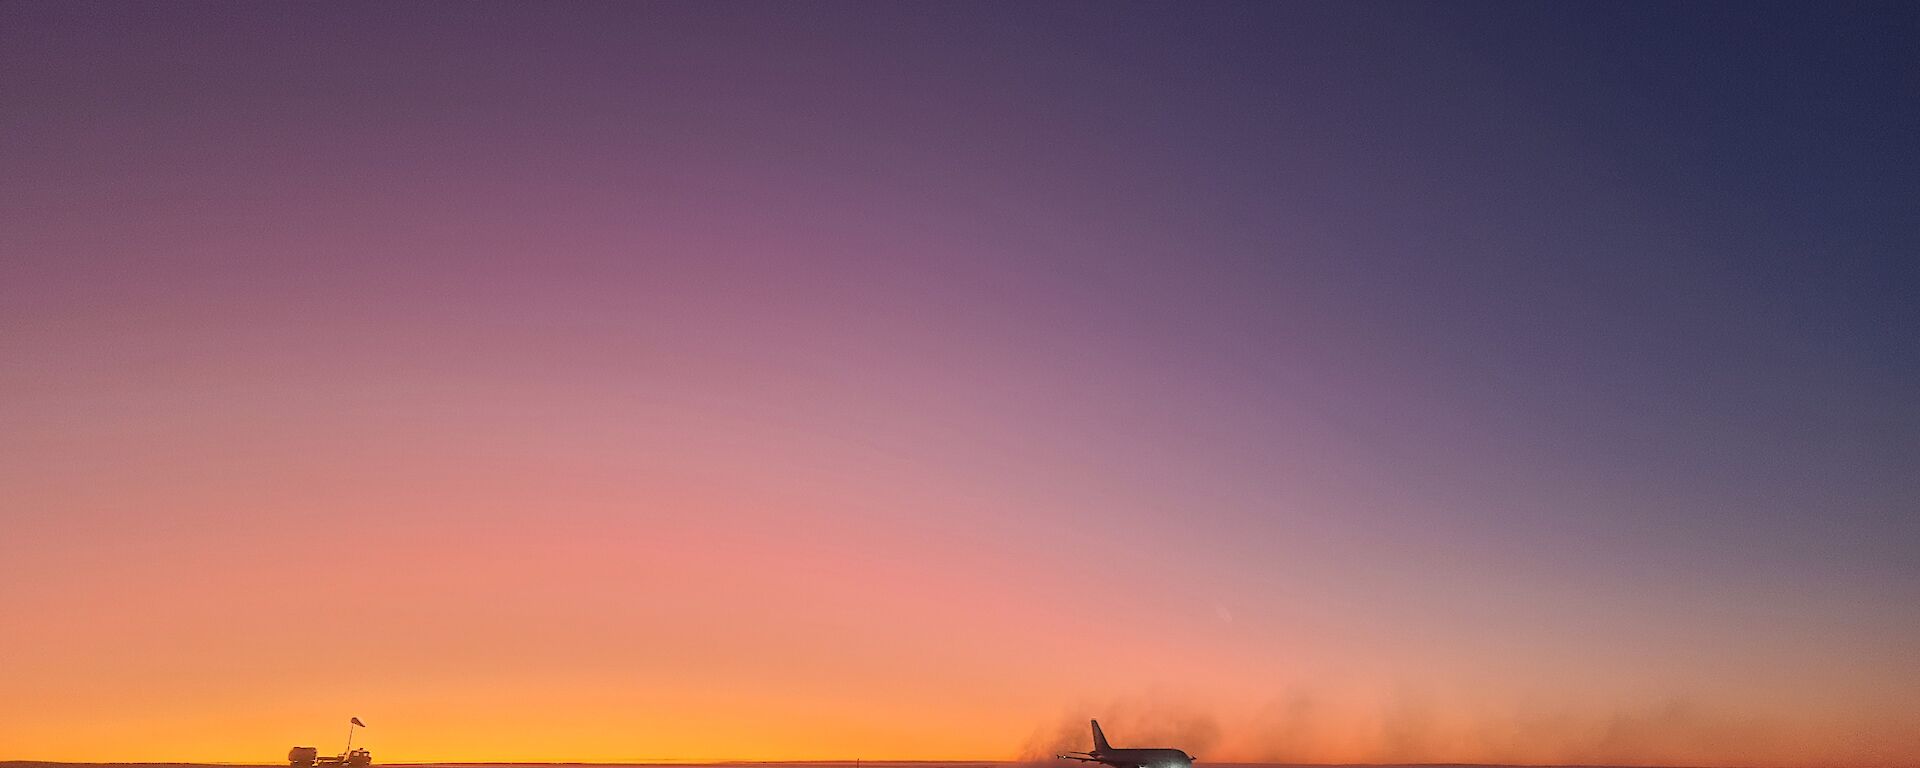 This photo is of the ice runway area at Wilkins Aerodrome at sunrise. There is a large white commercial aircraft in the lower middle of the picture, silhouetted with the orange and purple sky behind it. To the left of the photo is a small square vehicle.